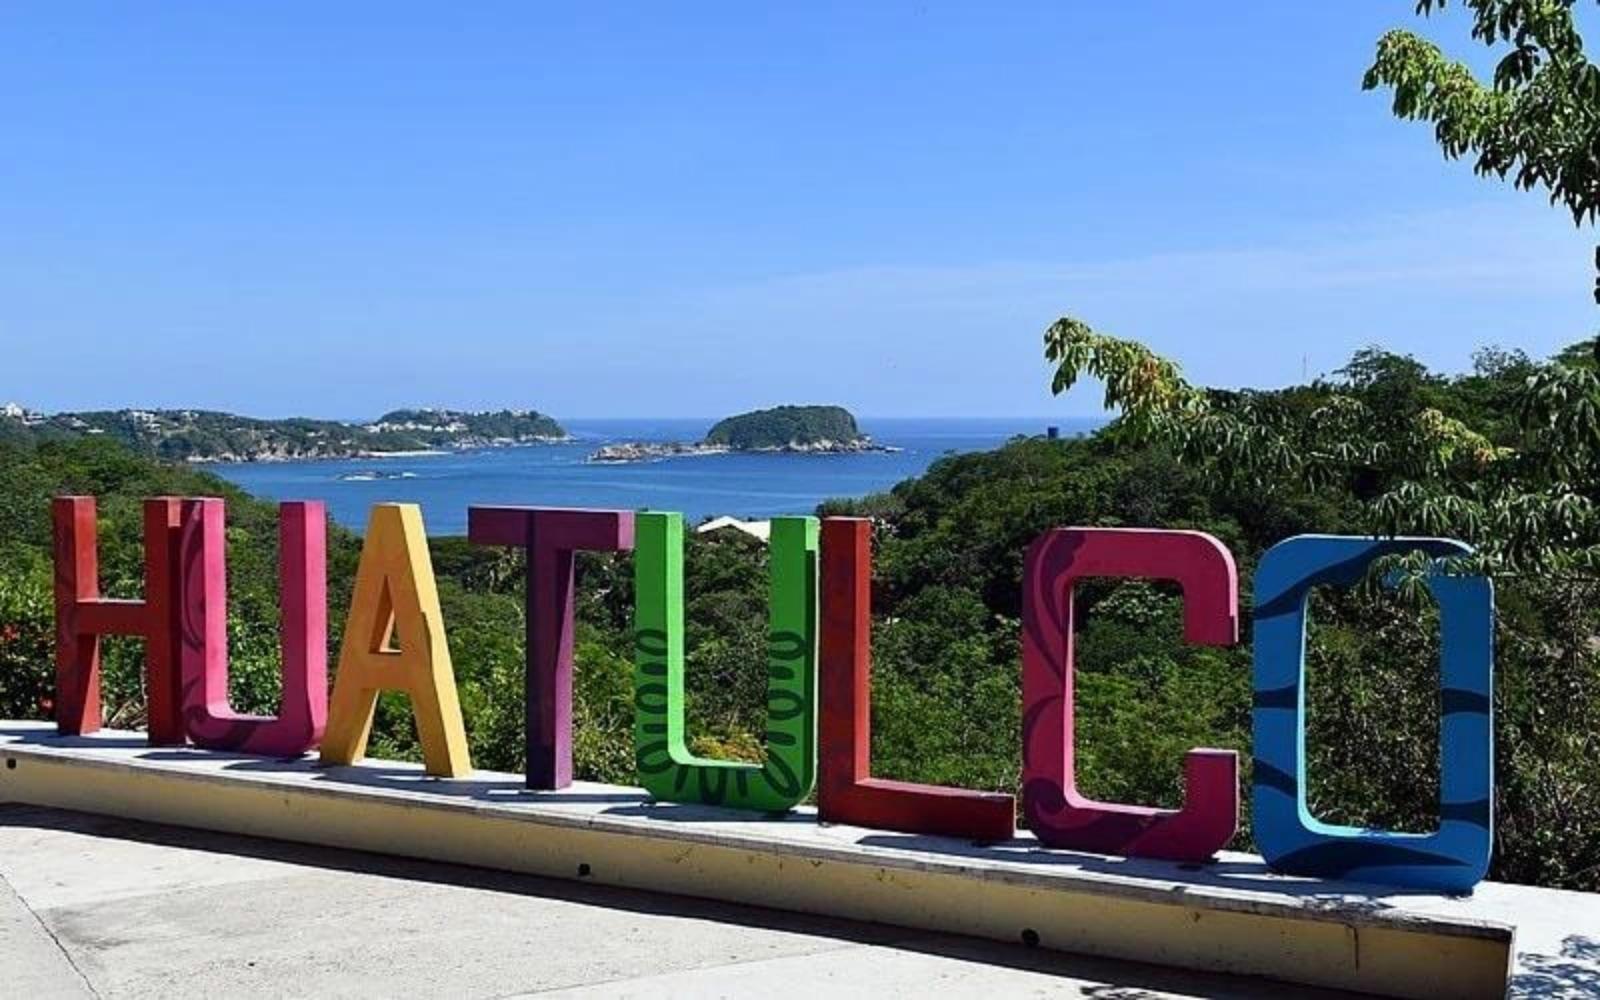 Luxury pet-friendly apartment with pool and gym for sale in Huatulco.